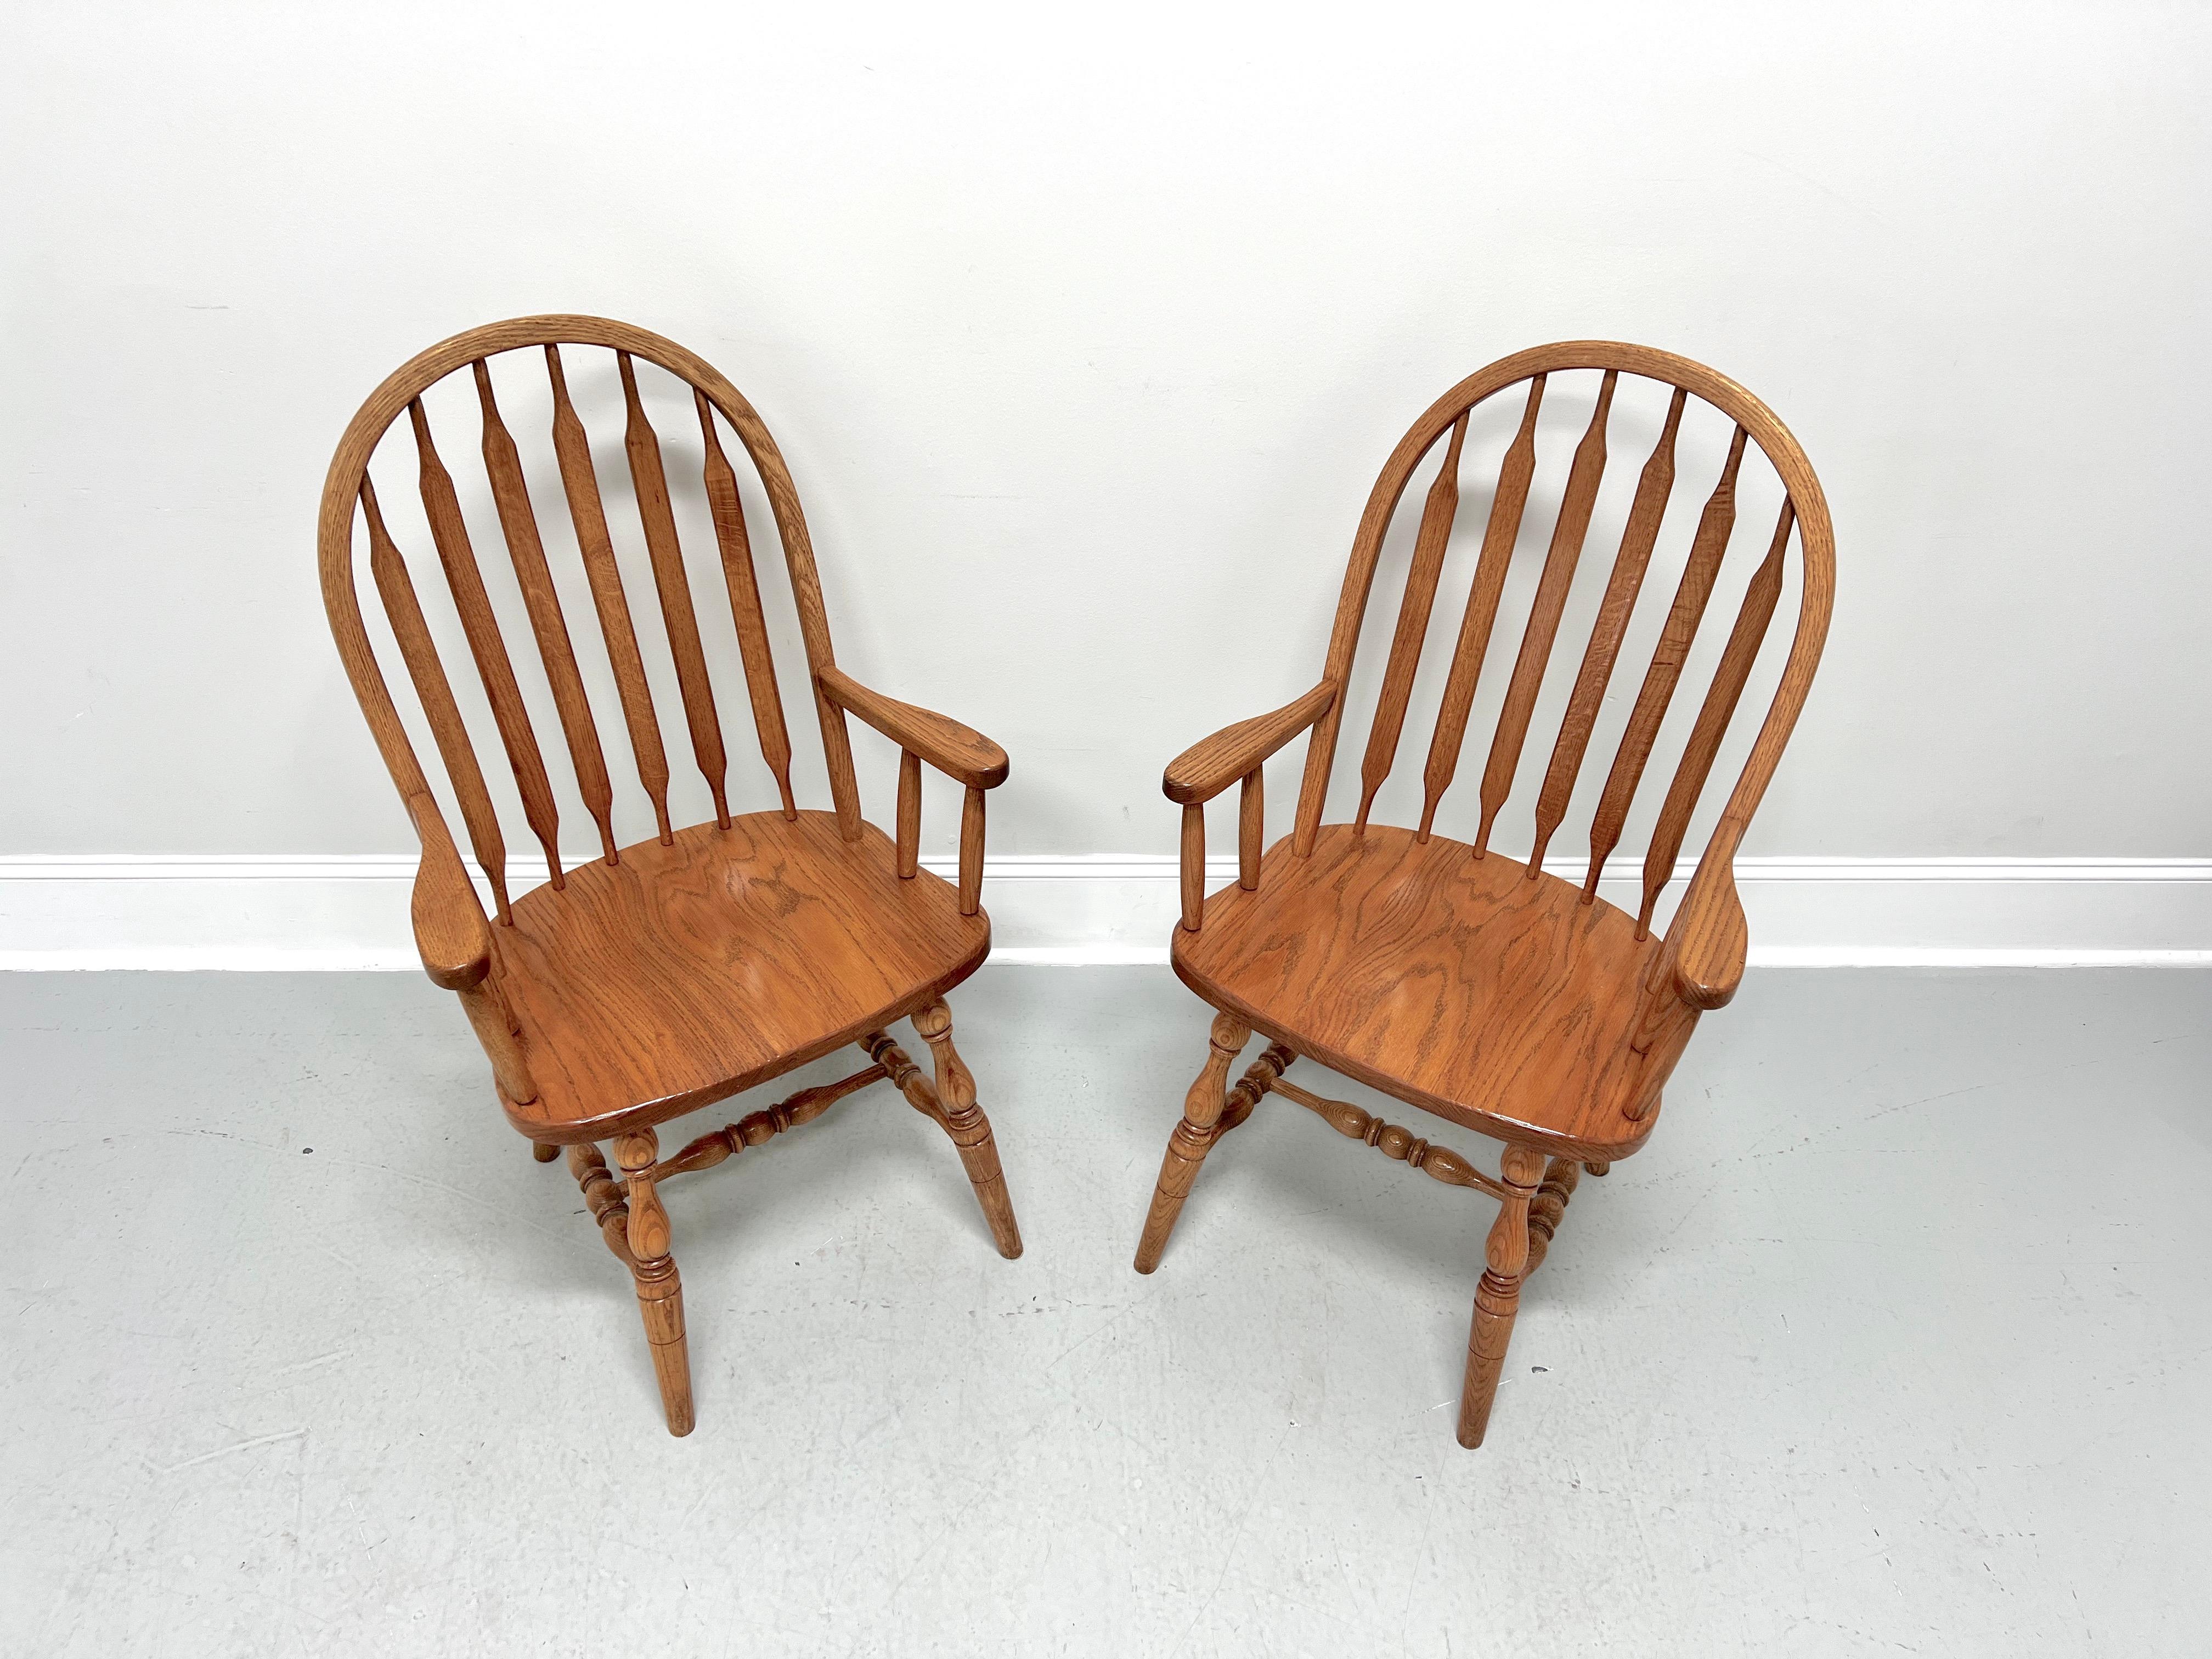 A pair of handcrafted Windsor dining armchairs in the Rockford style by Amish craftsmen. Solid oak, bowback, cattail spindles, straight carved arms with spindle supports, solid seat, turned legs, and turned stretchers.  Made in the USA, in the late